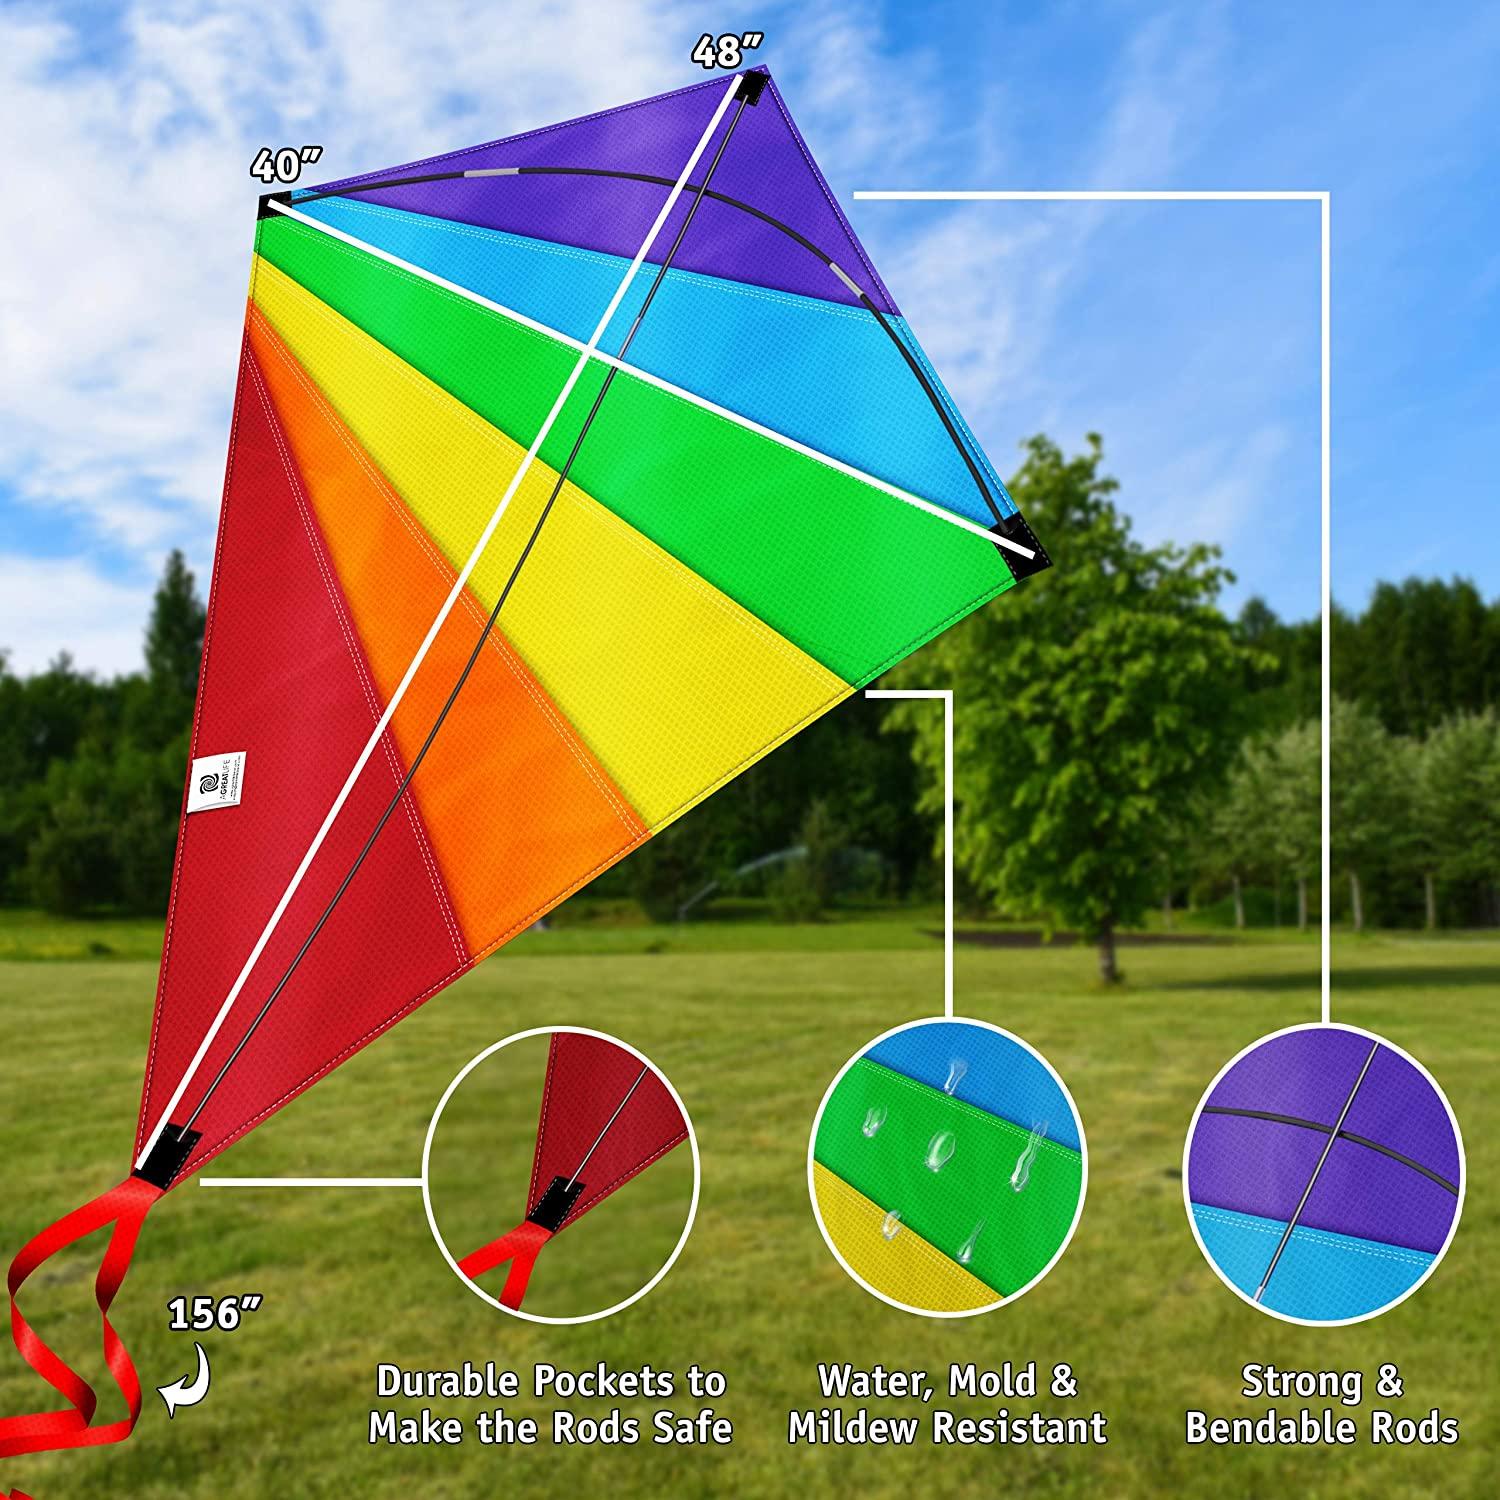 Large Diamond Kite for Kids - Lightweight, Classic Easy to Assemble, Fly,  Soars High in Low Wind Speeds - A Great Way to Enjoy and Spend Time with  Friends Family, Easy Flyer